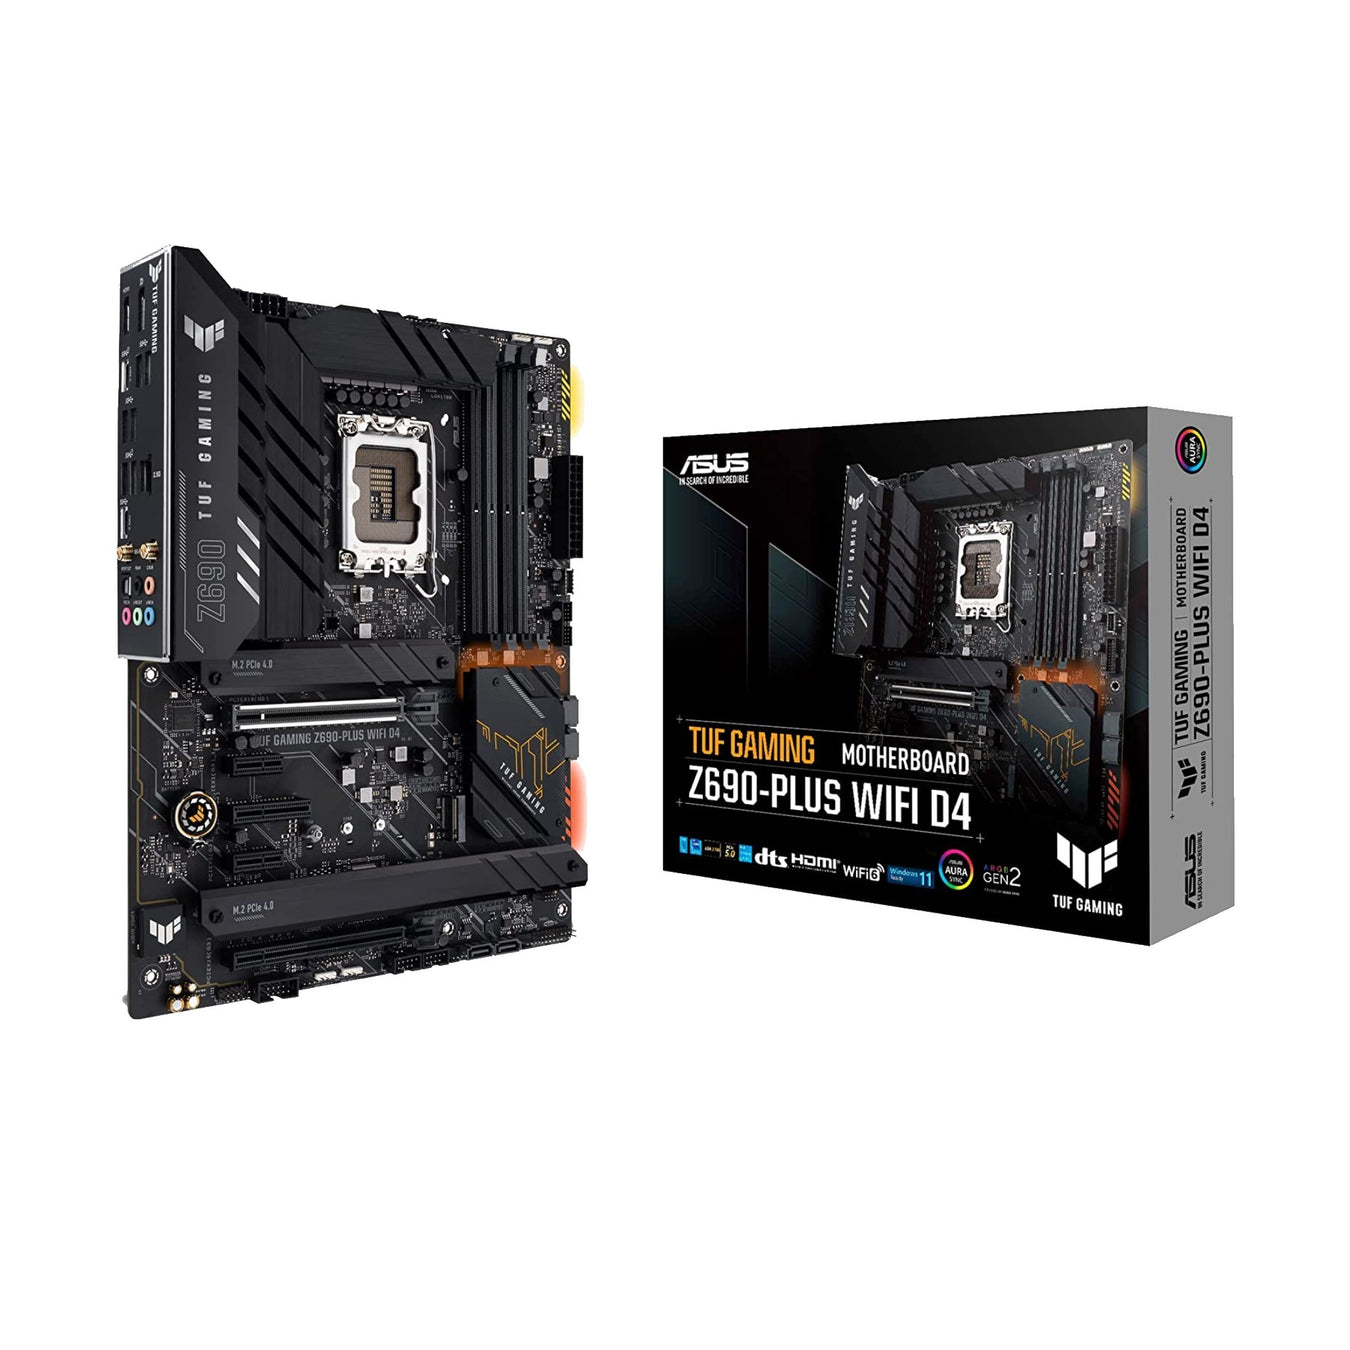 Intel motherboards and AMD Motherboards for gaming and business. Cheapest motherboards.